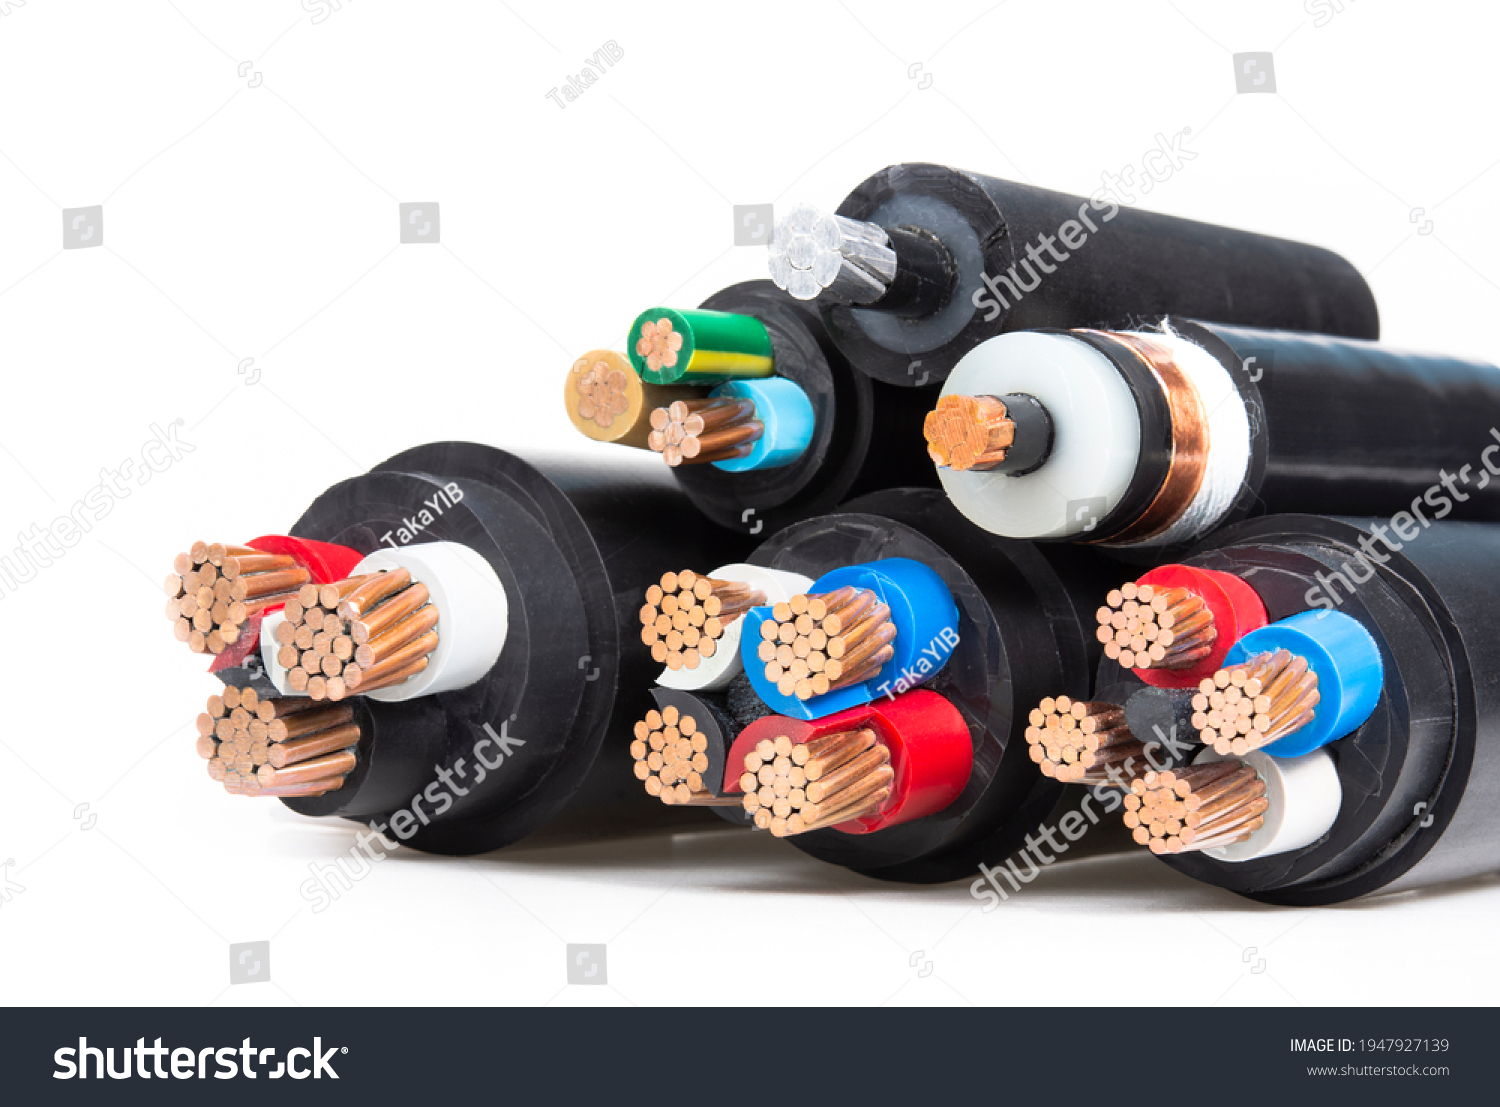 A large group of copper wires on a white background #1947927139